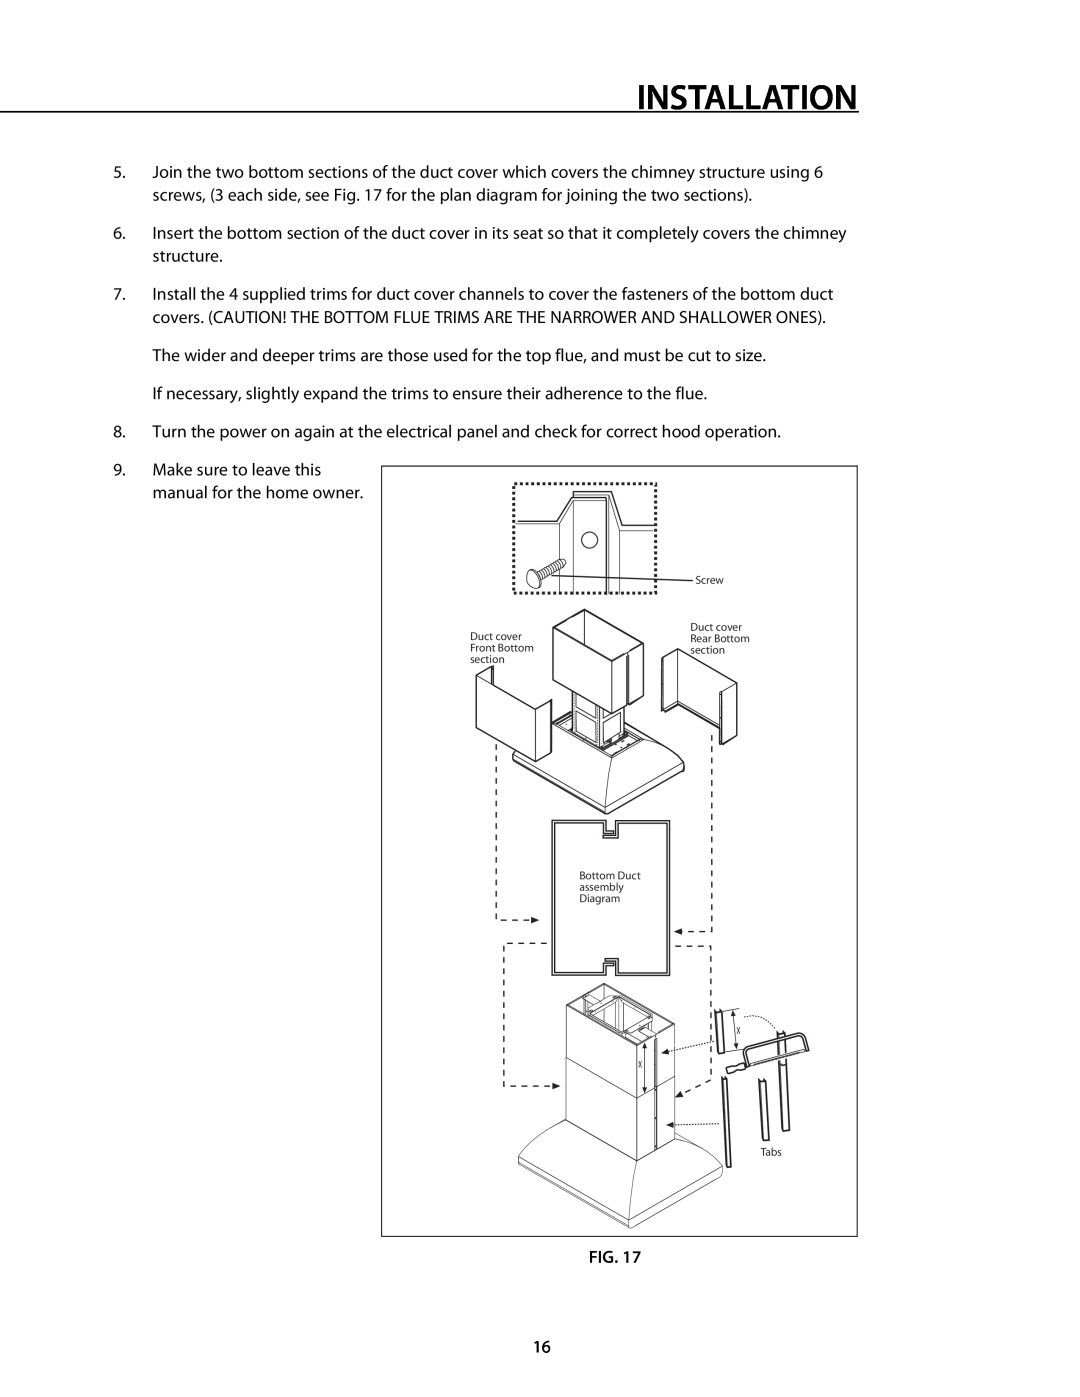 DCS 221712 Installation, Make sure to leave this manual for the home owner 